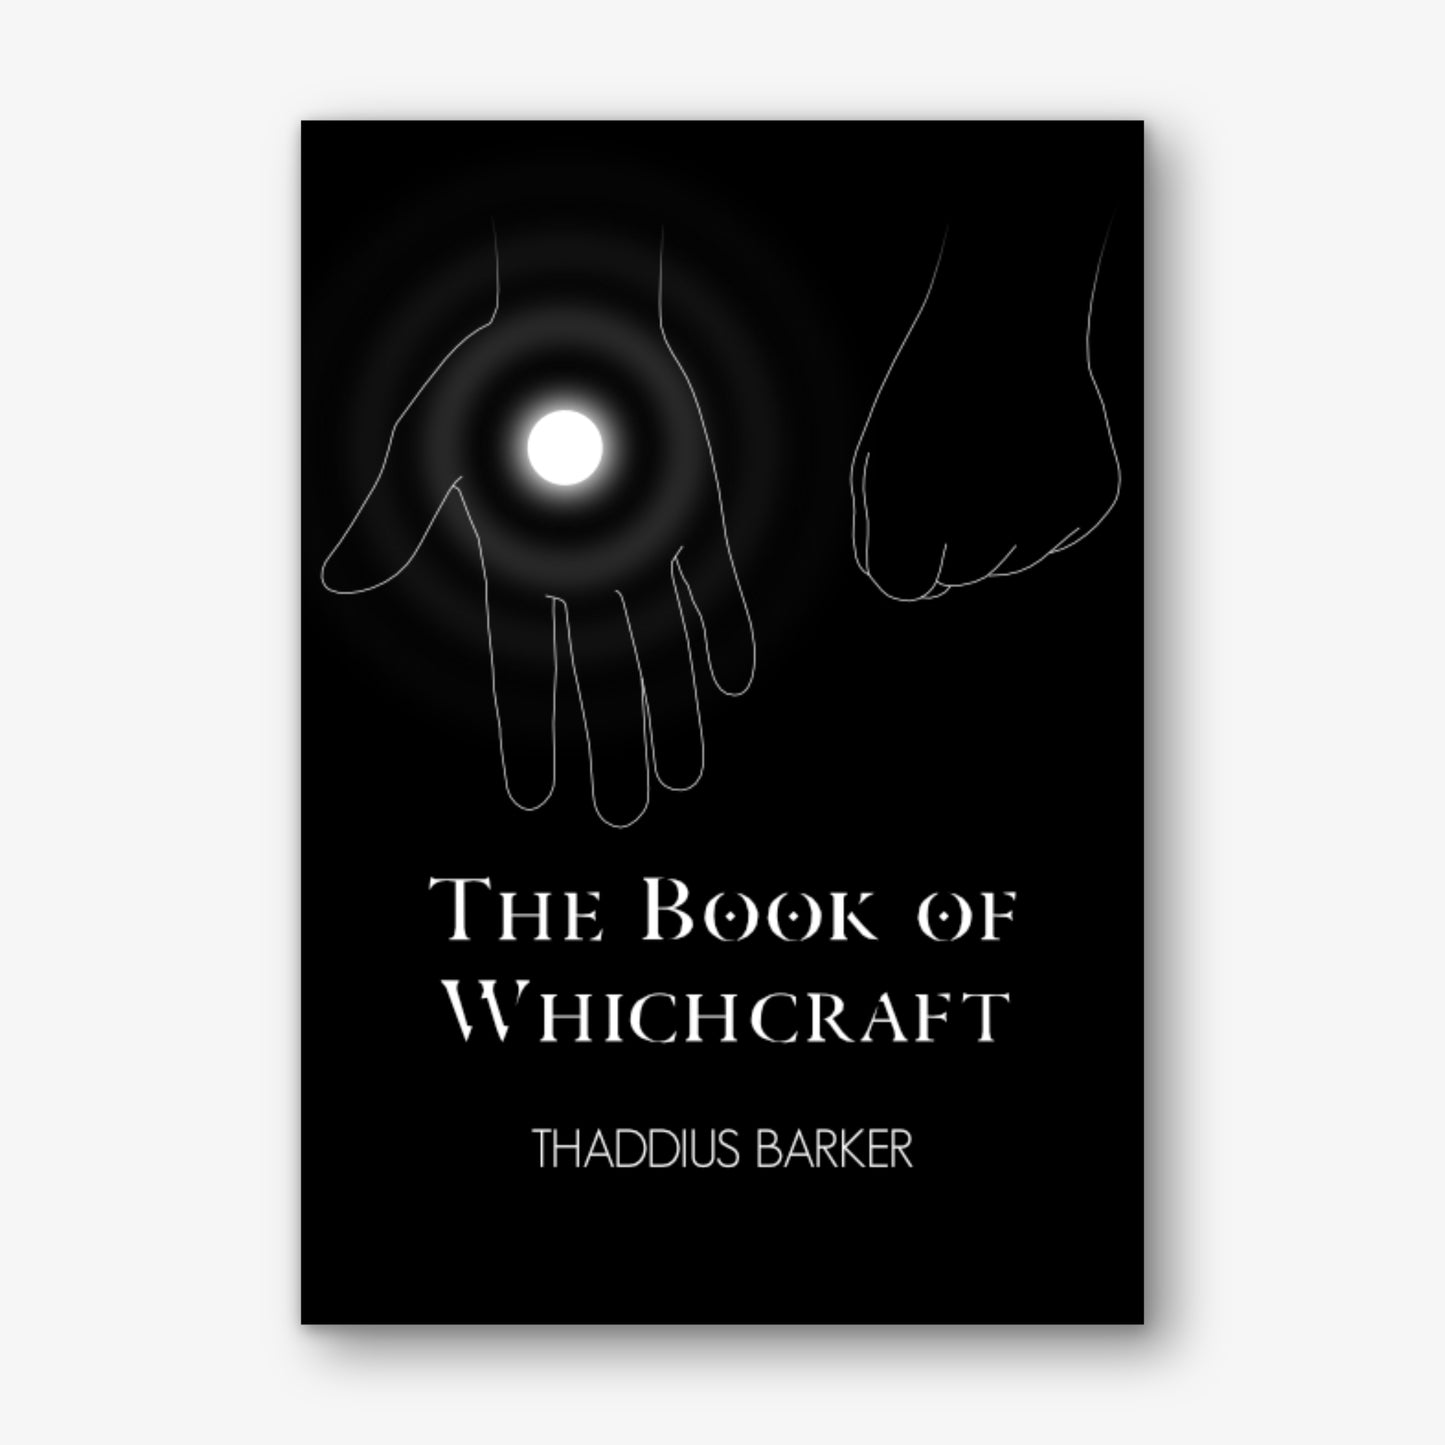 The Book of Whichcraft by Thaddius Barker